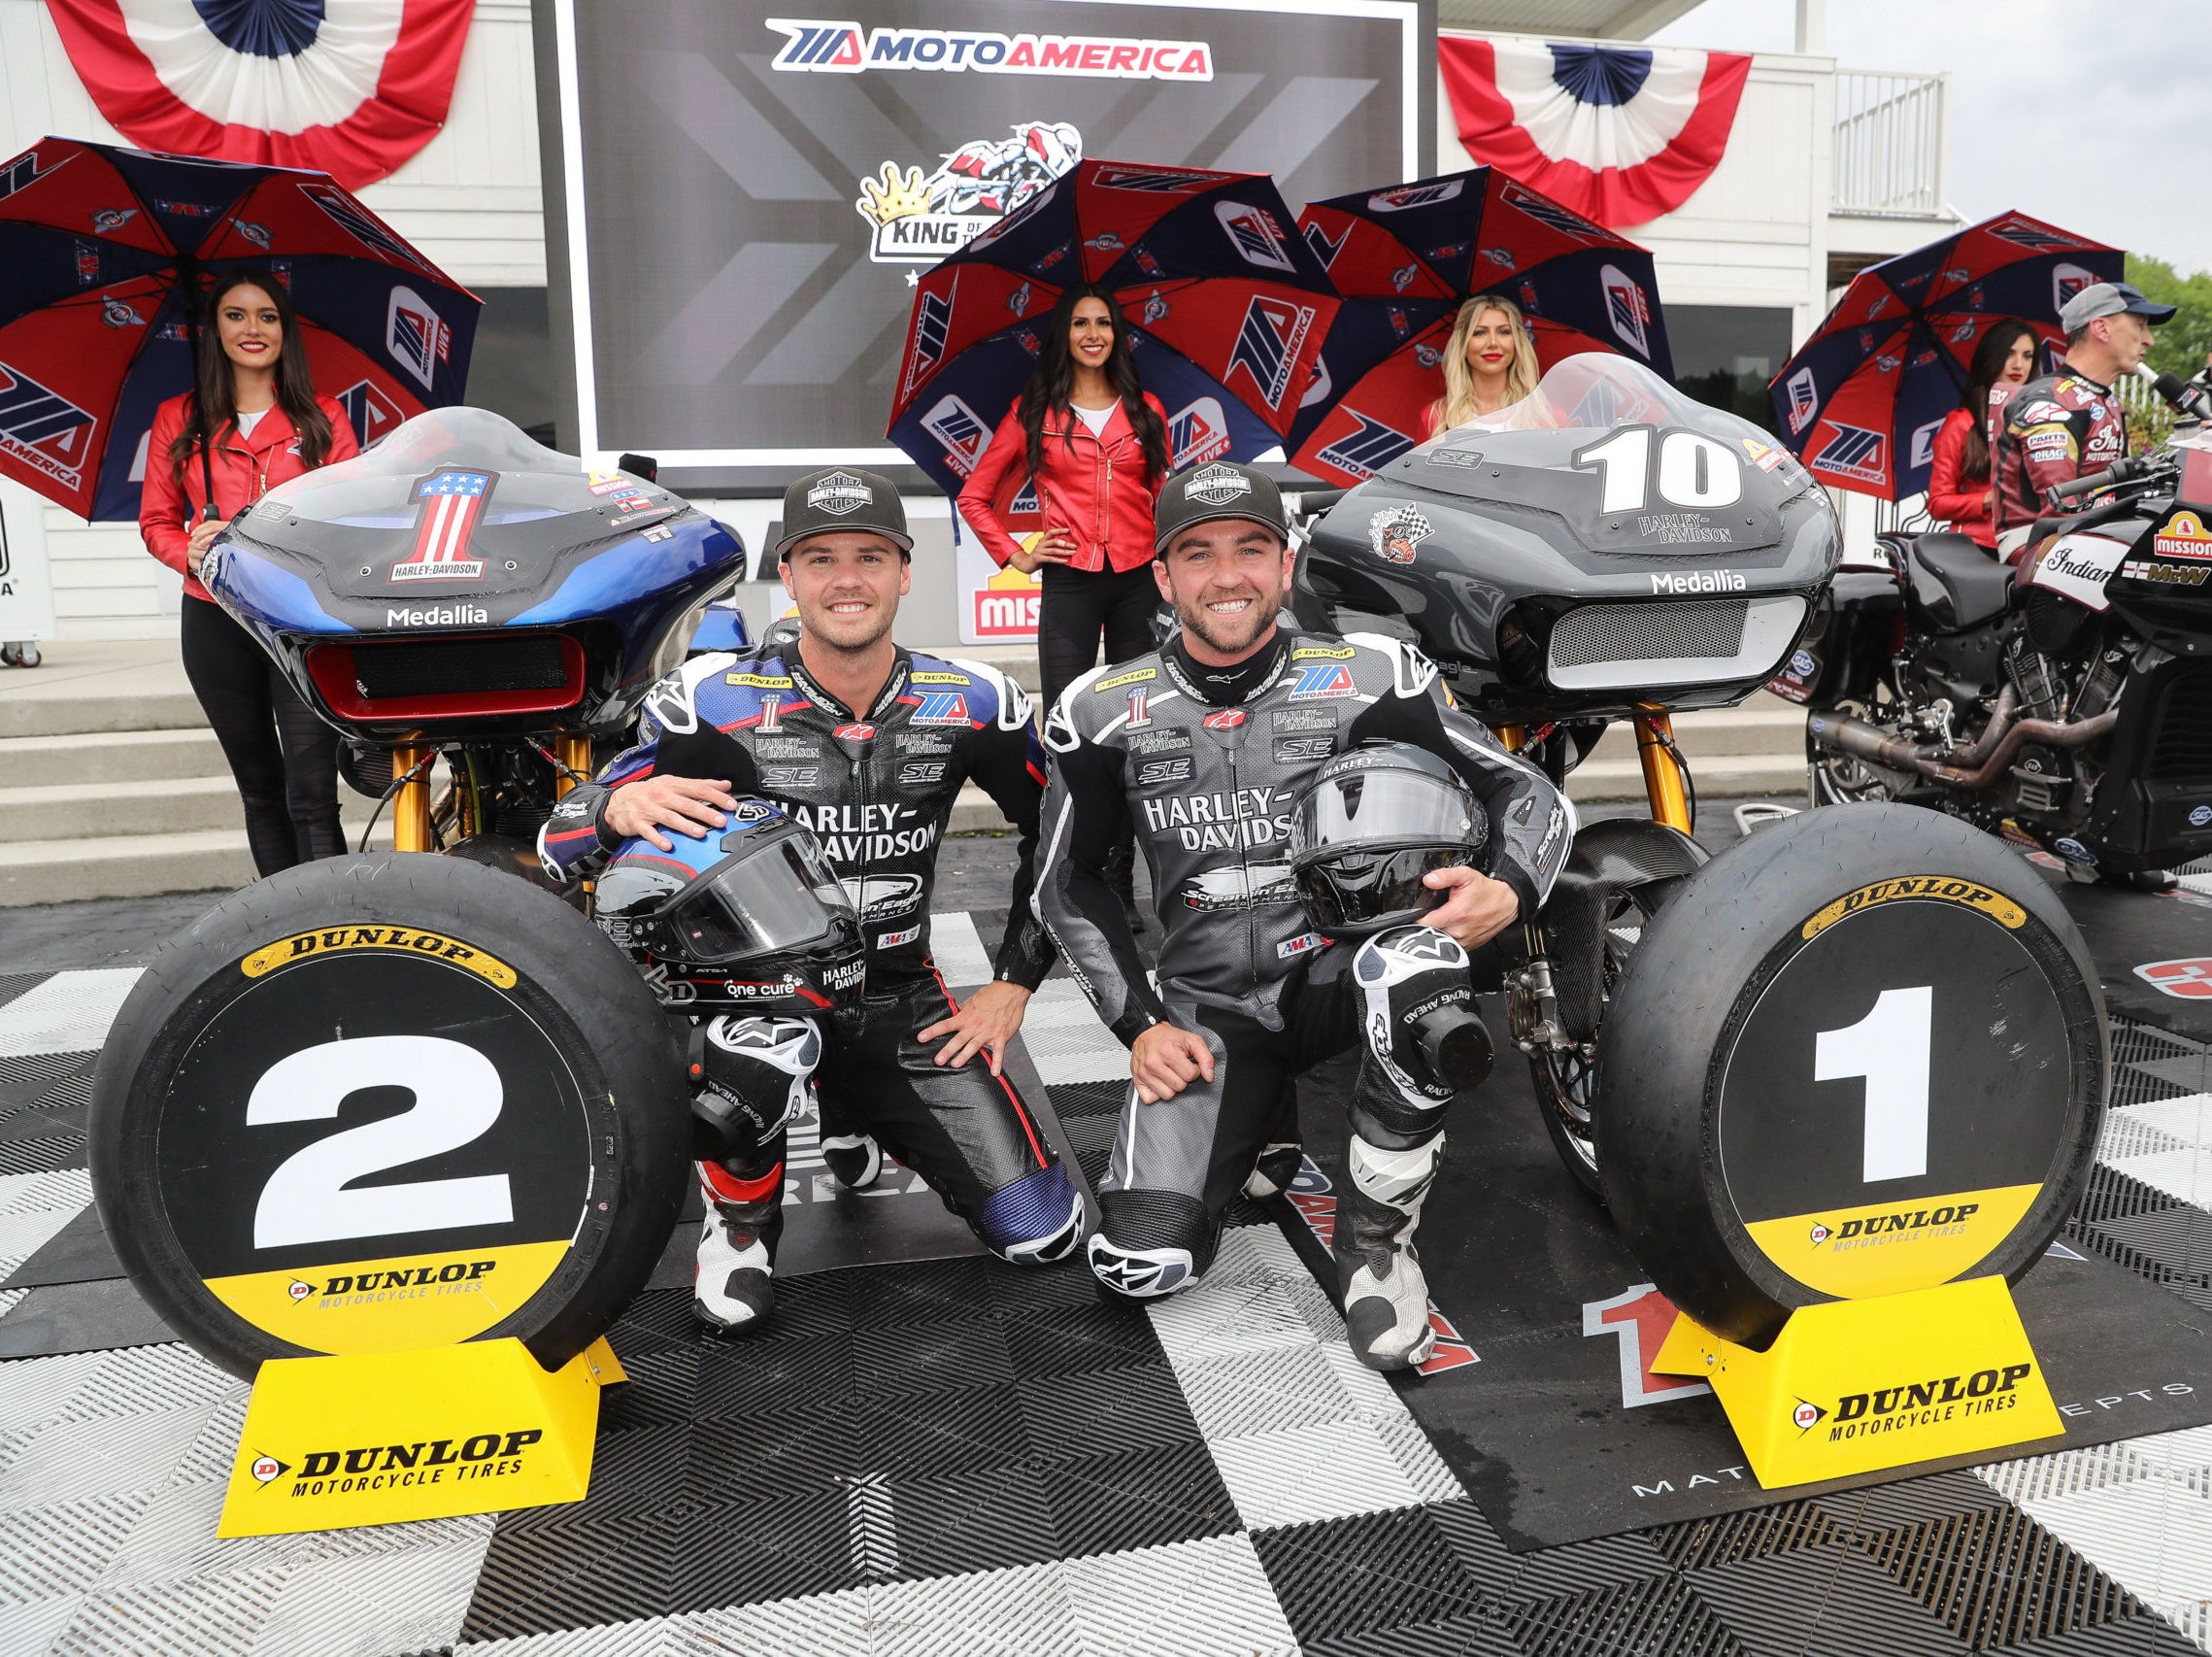 Travis Wyman Wins King Of The Baggers Race at Road America American Rider